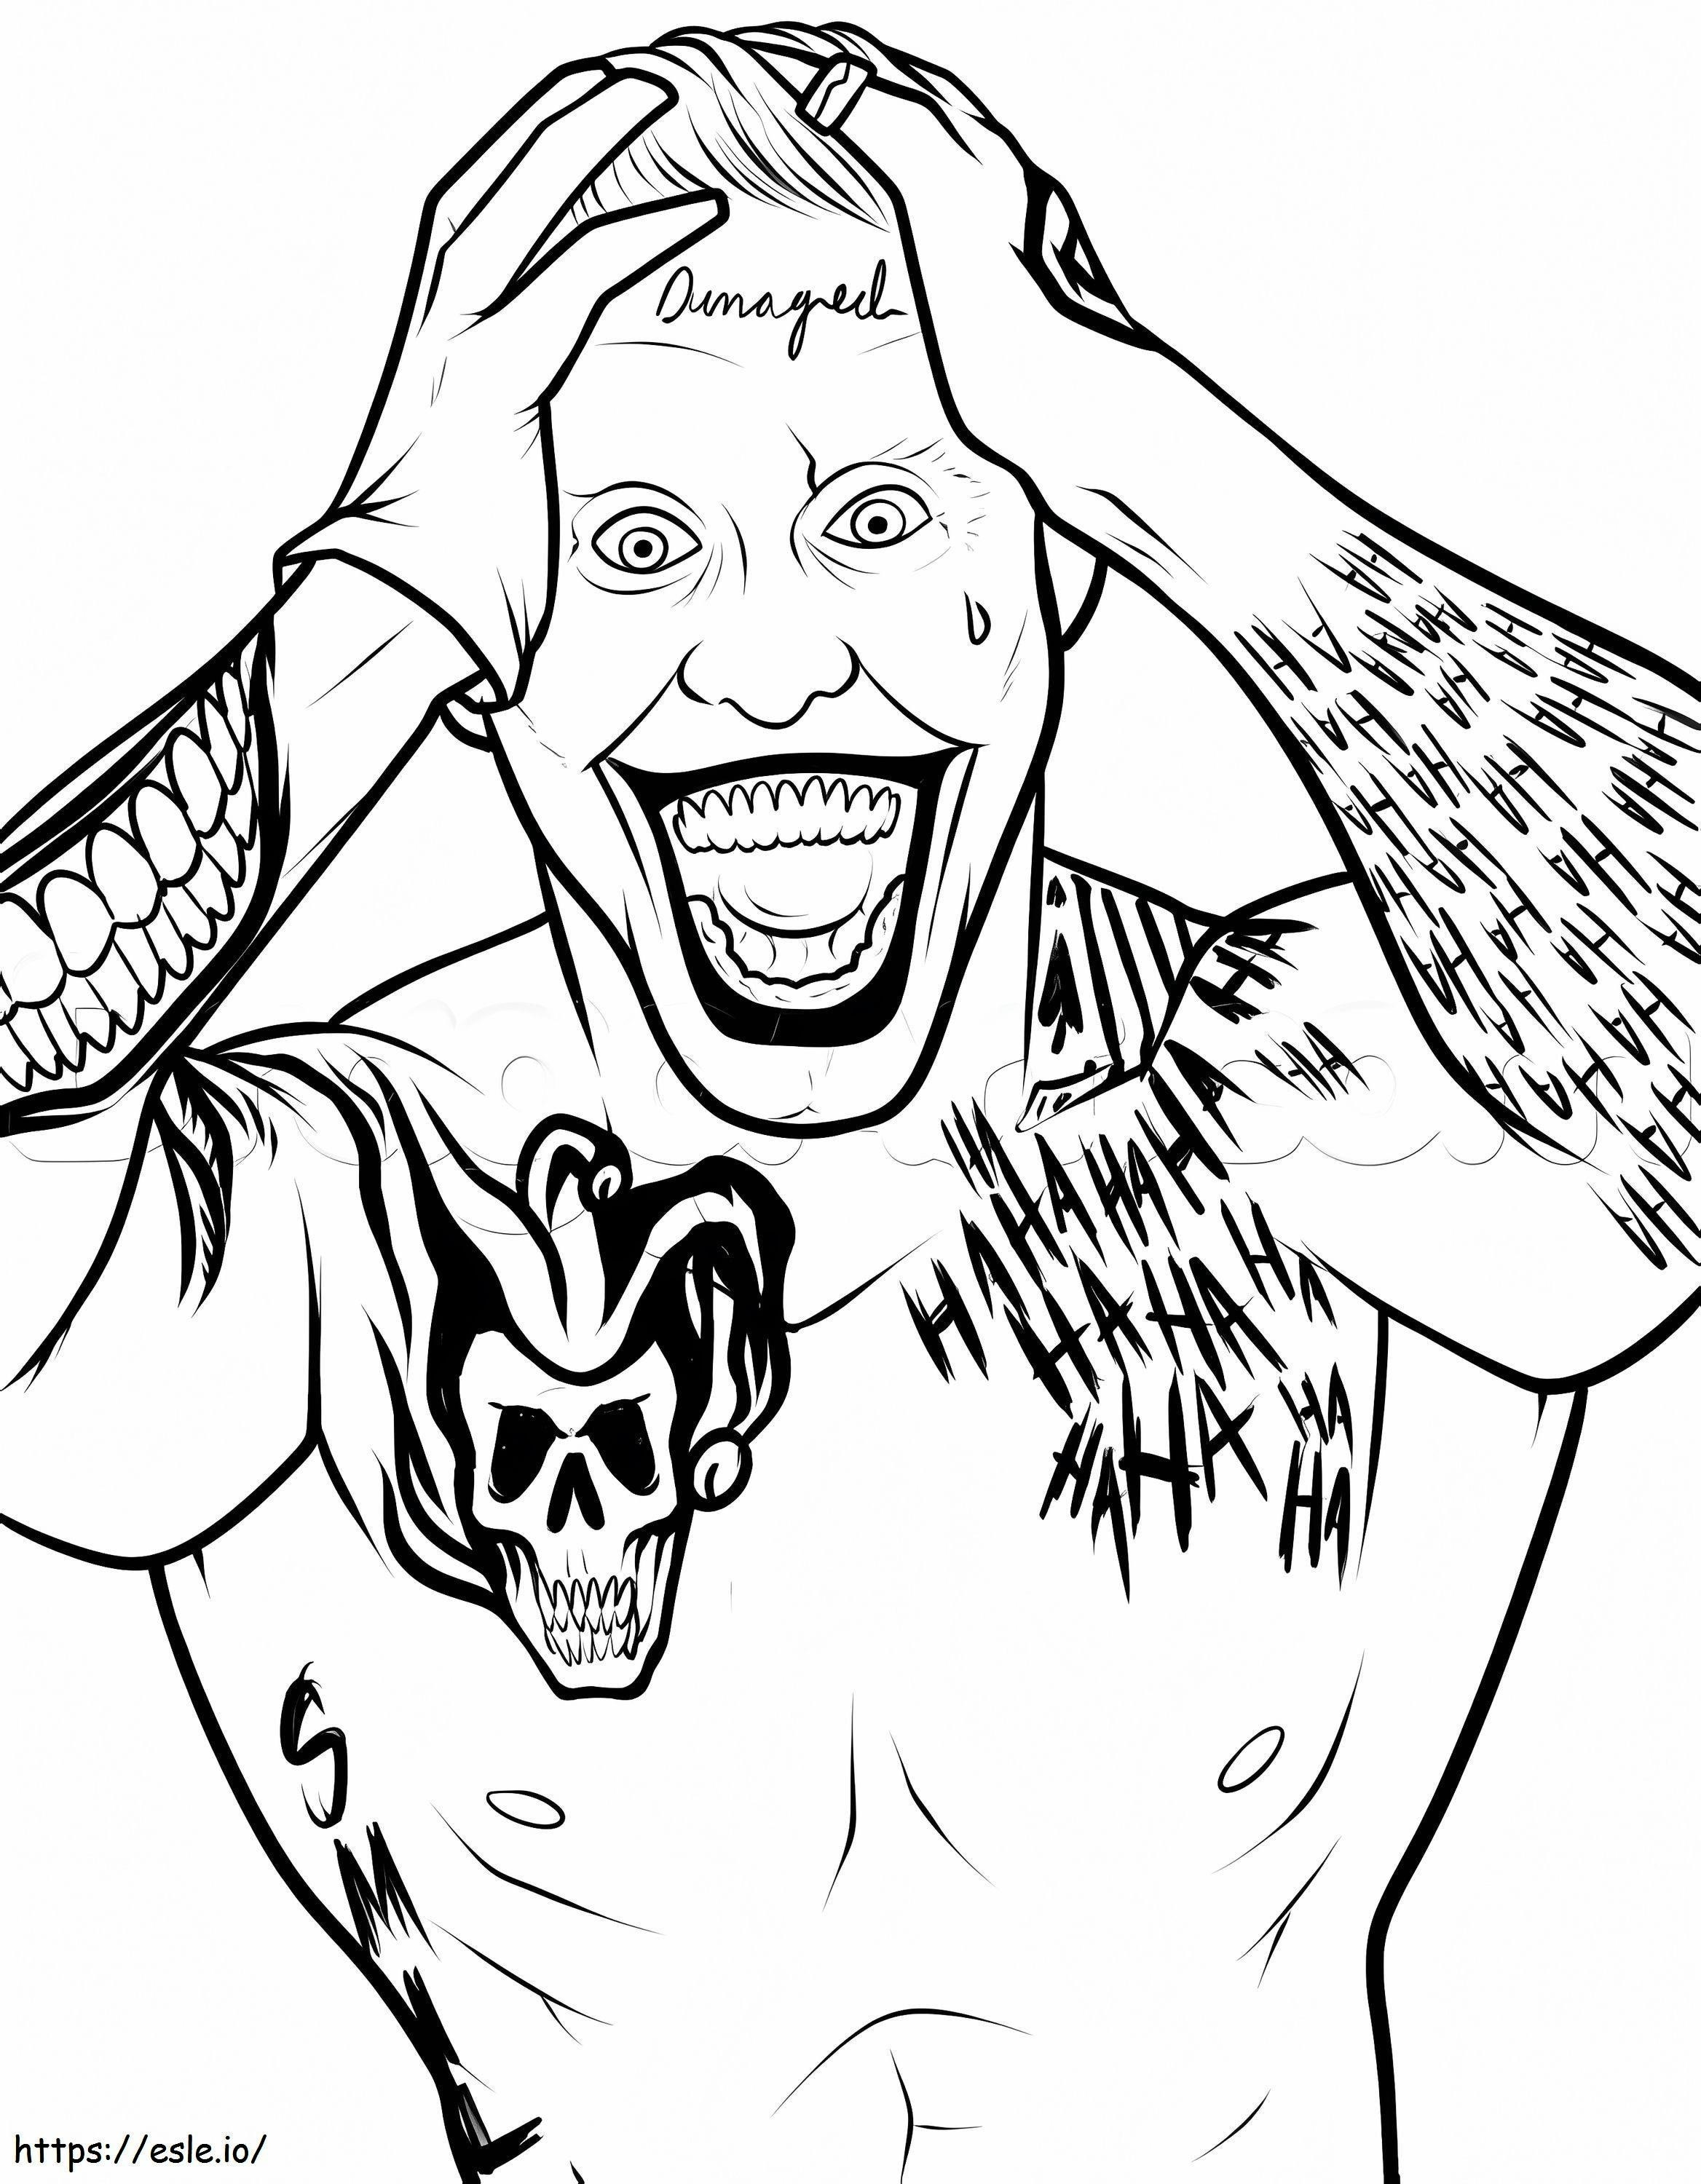 Funny Joker From Suicide Squad coloring page